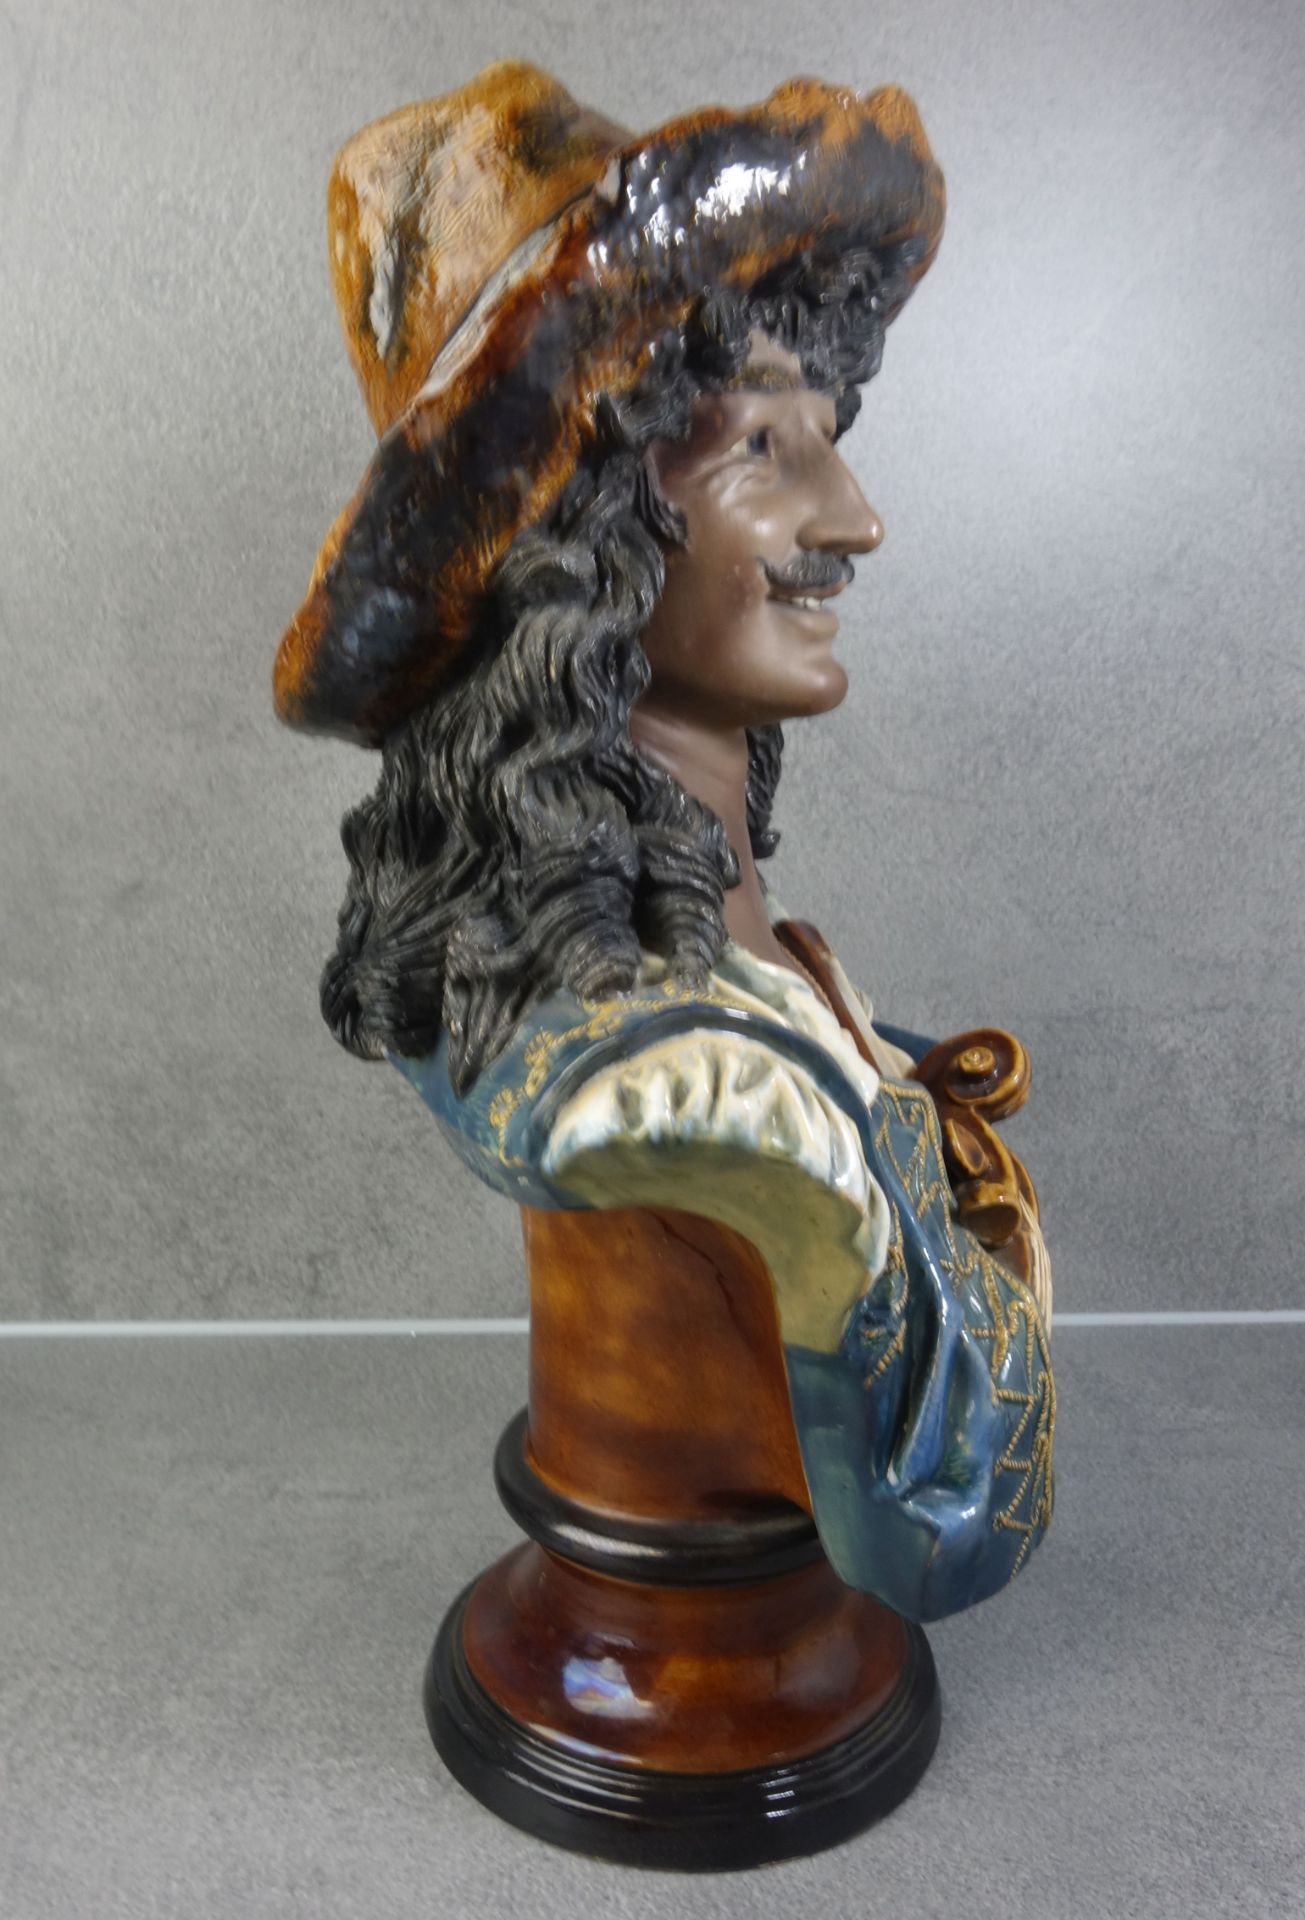 R. STURM SCULPTURES: "MUSICIAN" AND "FORTUNE TELLER" - Image 6 of 6